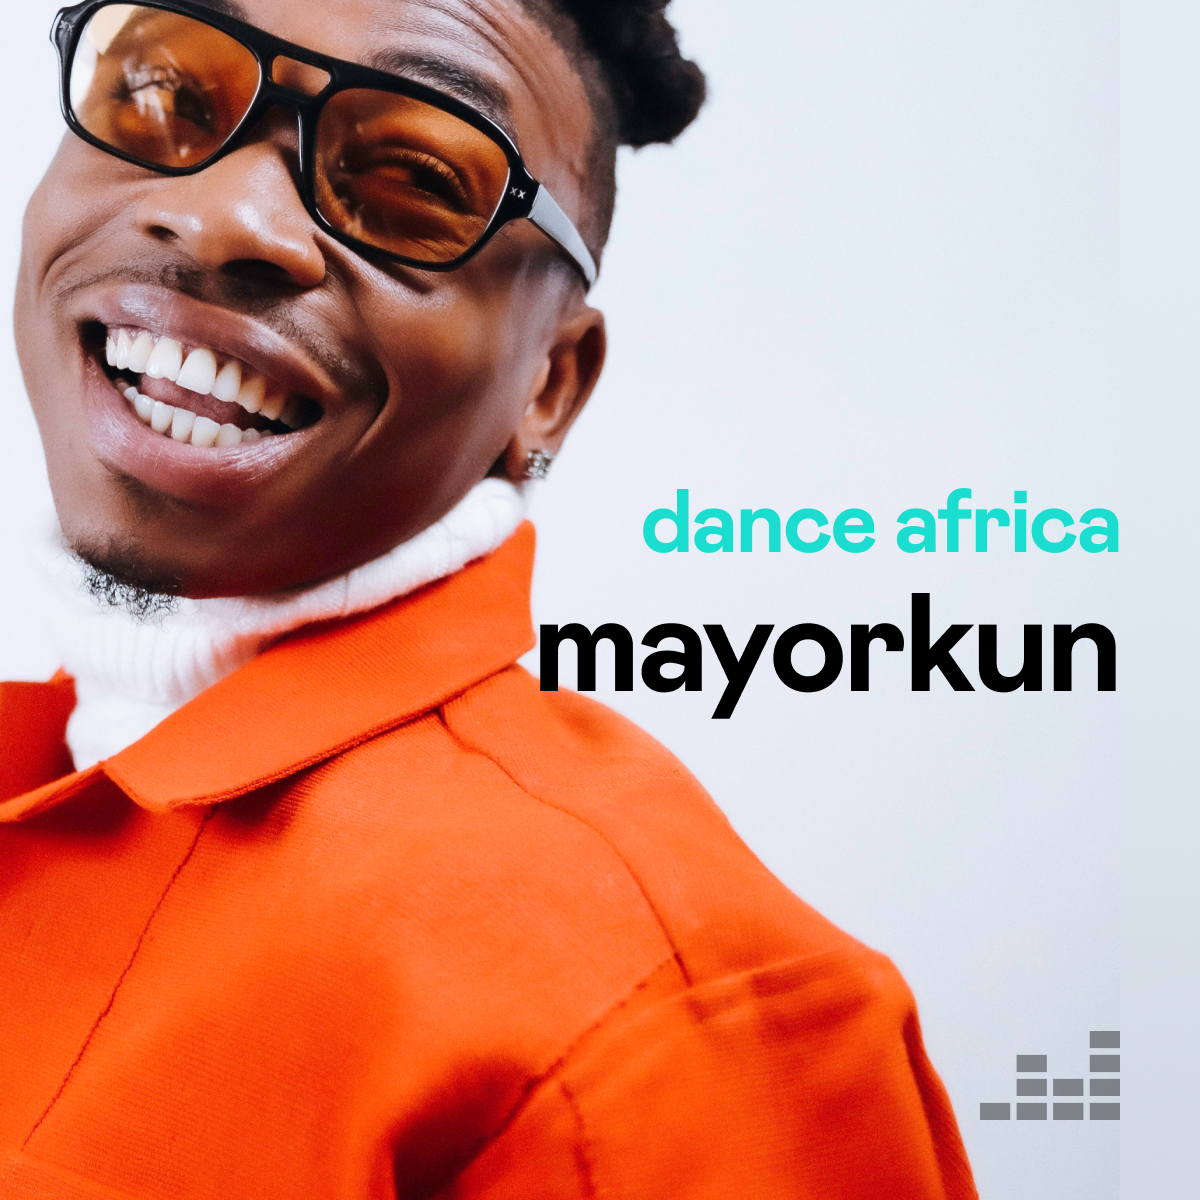 Looking for good vibes? Check out the exclusive #DanceAfrica mix curated by @IamMayorKun 🙌 dzr.lnk.to/DanceAfricaMay…